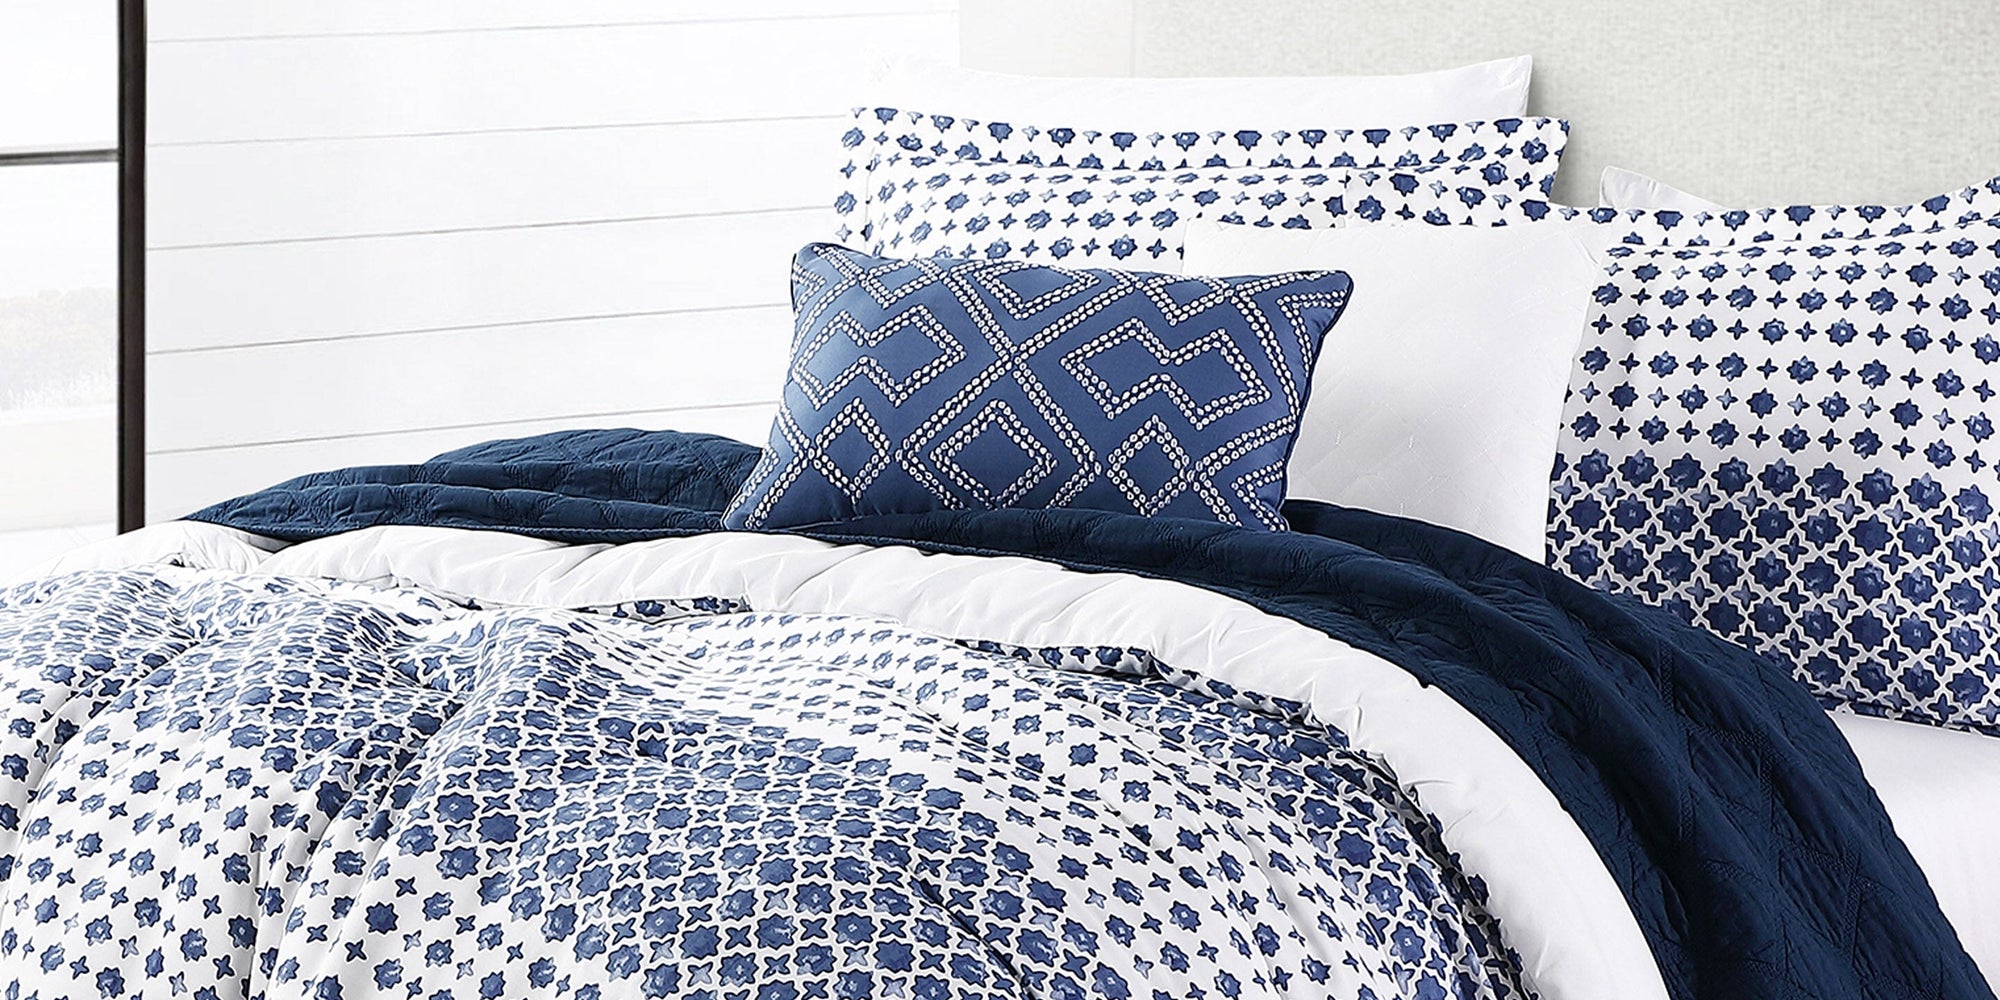 Announcing the Anne Klein Home Collection